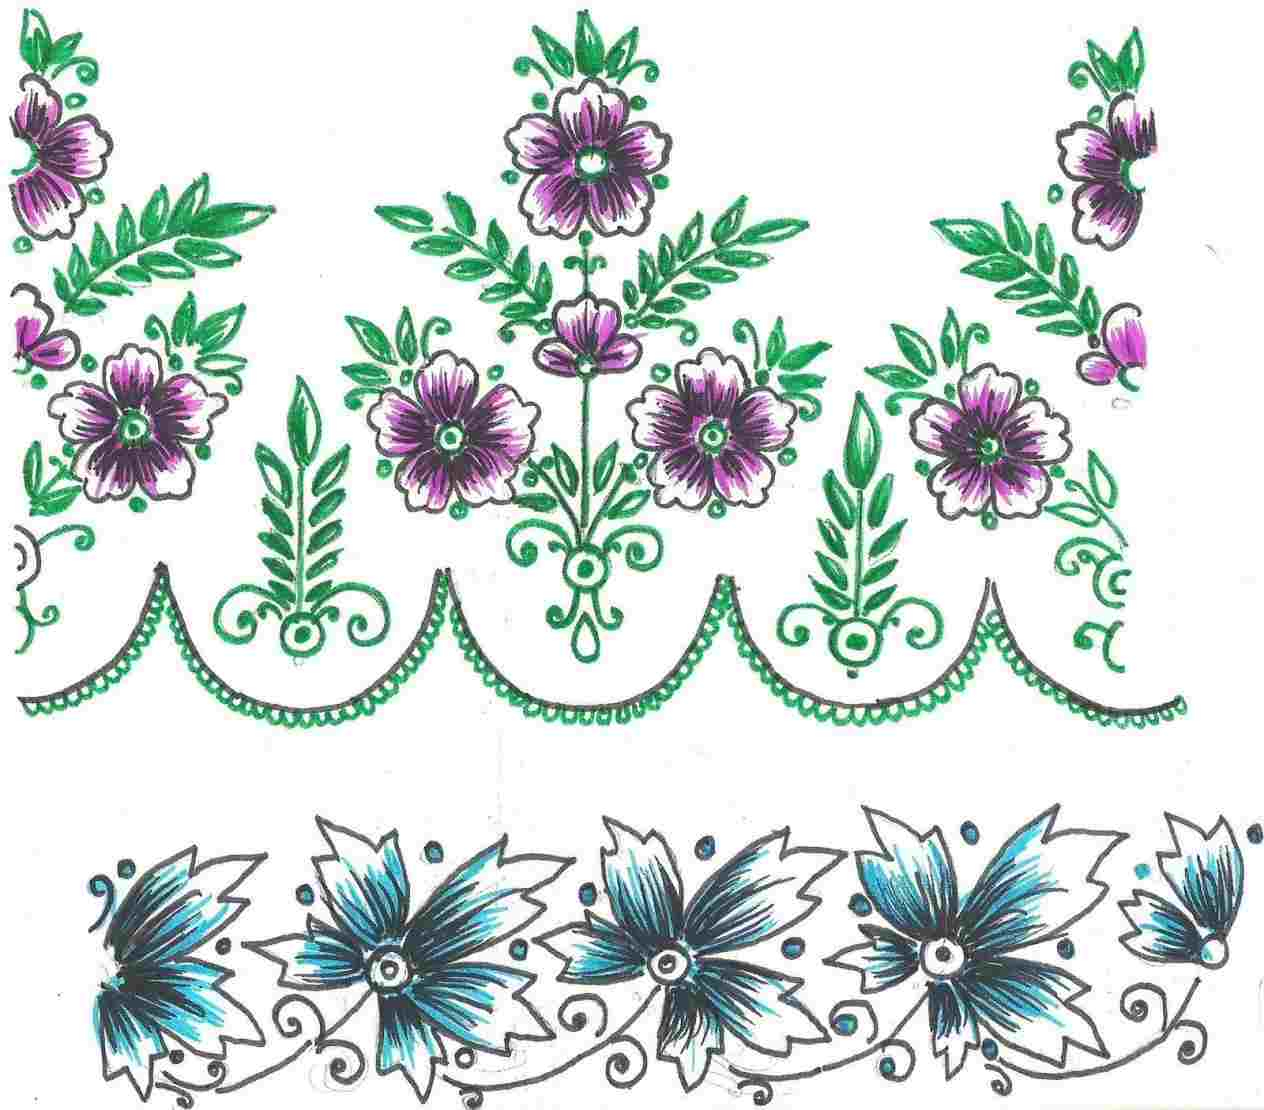 Tablecloth Hand Embroidery Patterns Youtuberhyoutubecom Free Hand Embroidery Flowers Patterns And